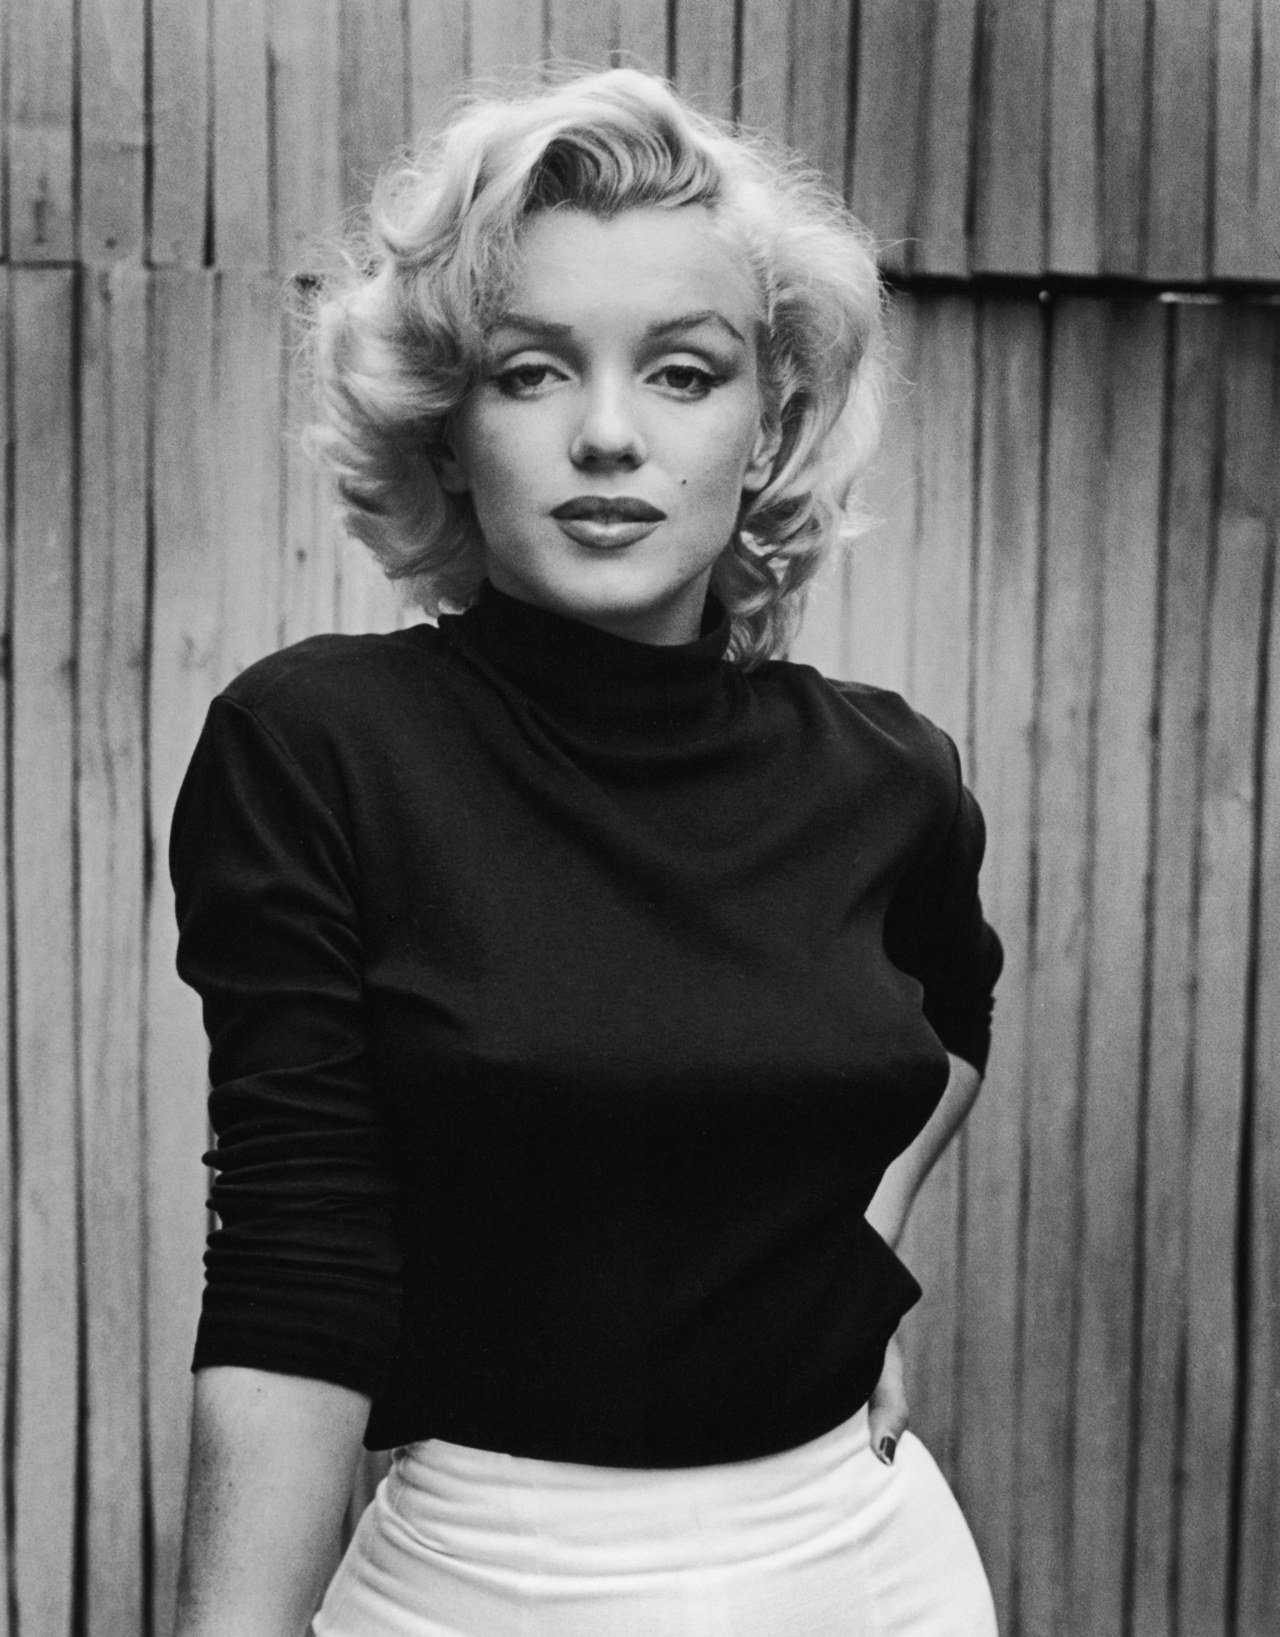 Porträt of American actress Marilyn Monroe (1926 - 1962) as she poses on the patio outside of her home, Hollywood, California, May 1953. (Photo by Alfred Eisenstaedt/The LIFE Picture Collection/Getty Images)